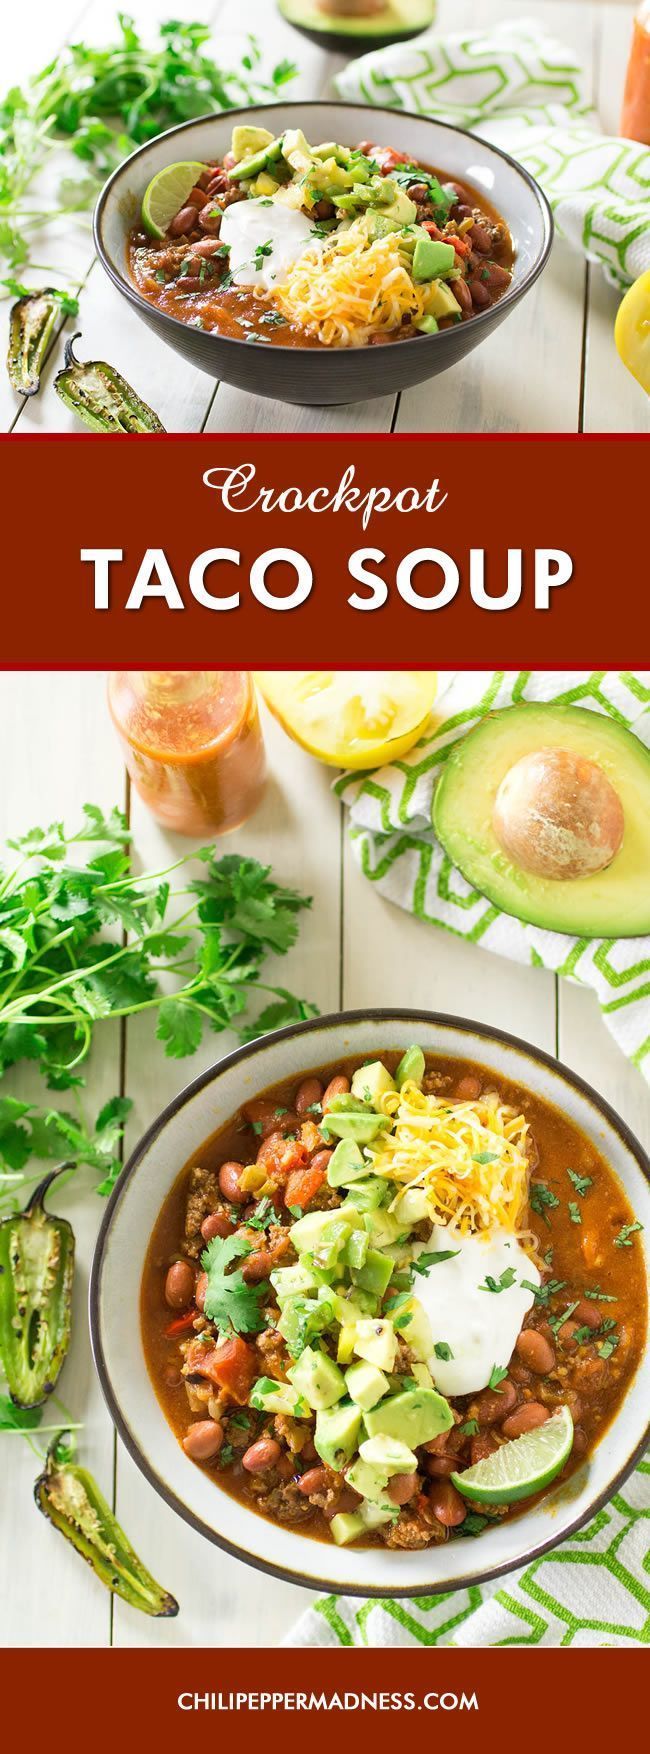 Crock Pot Taco Soup – A recipe for hearty, chili-like soup with all your favorite taco ingredients, including ground beef, lots of